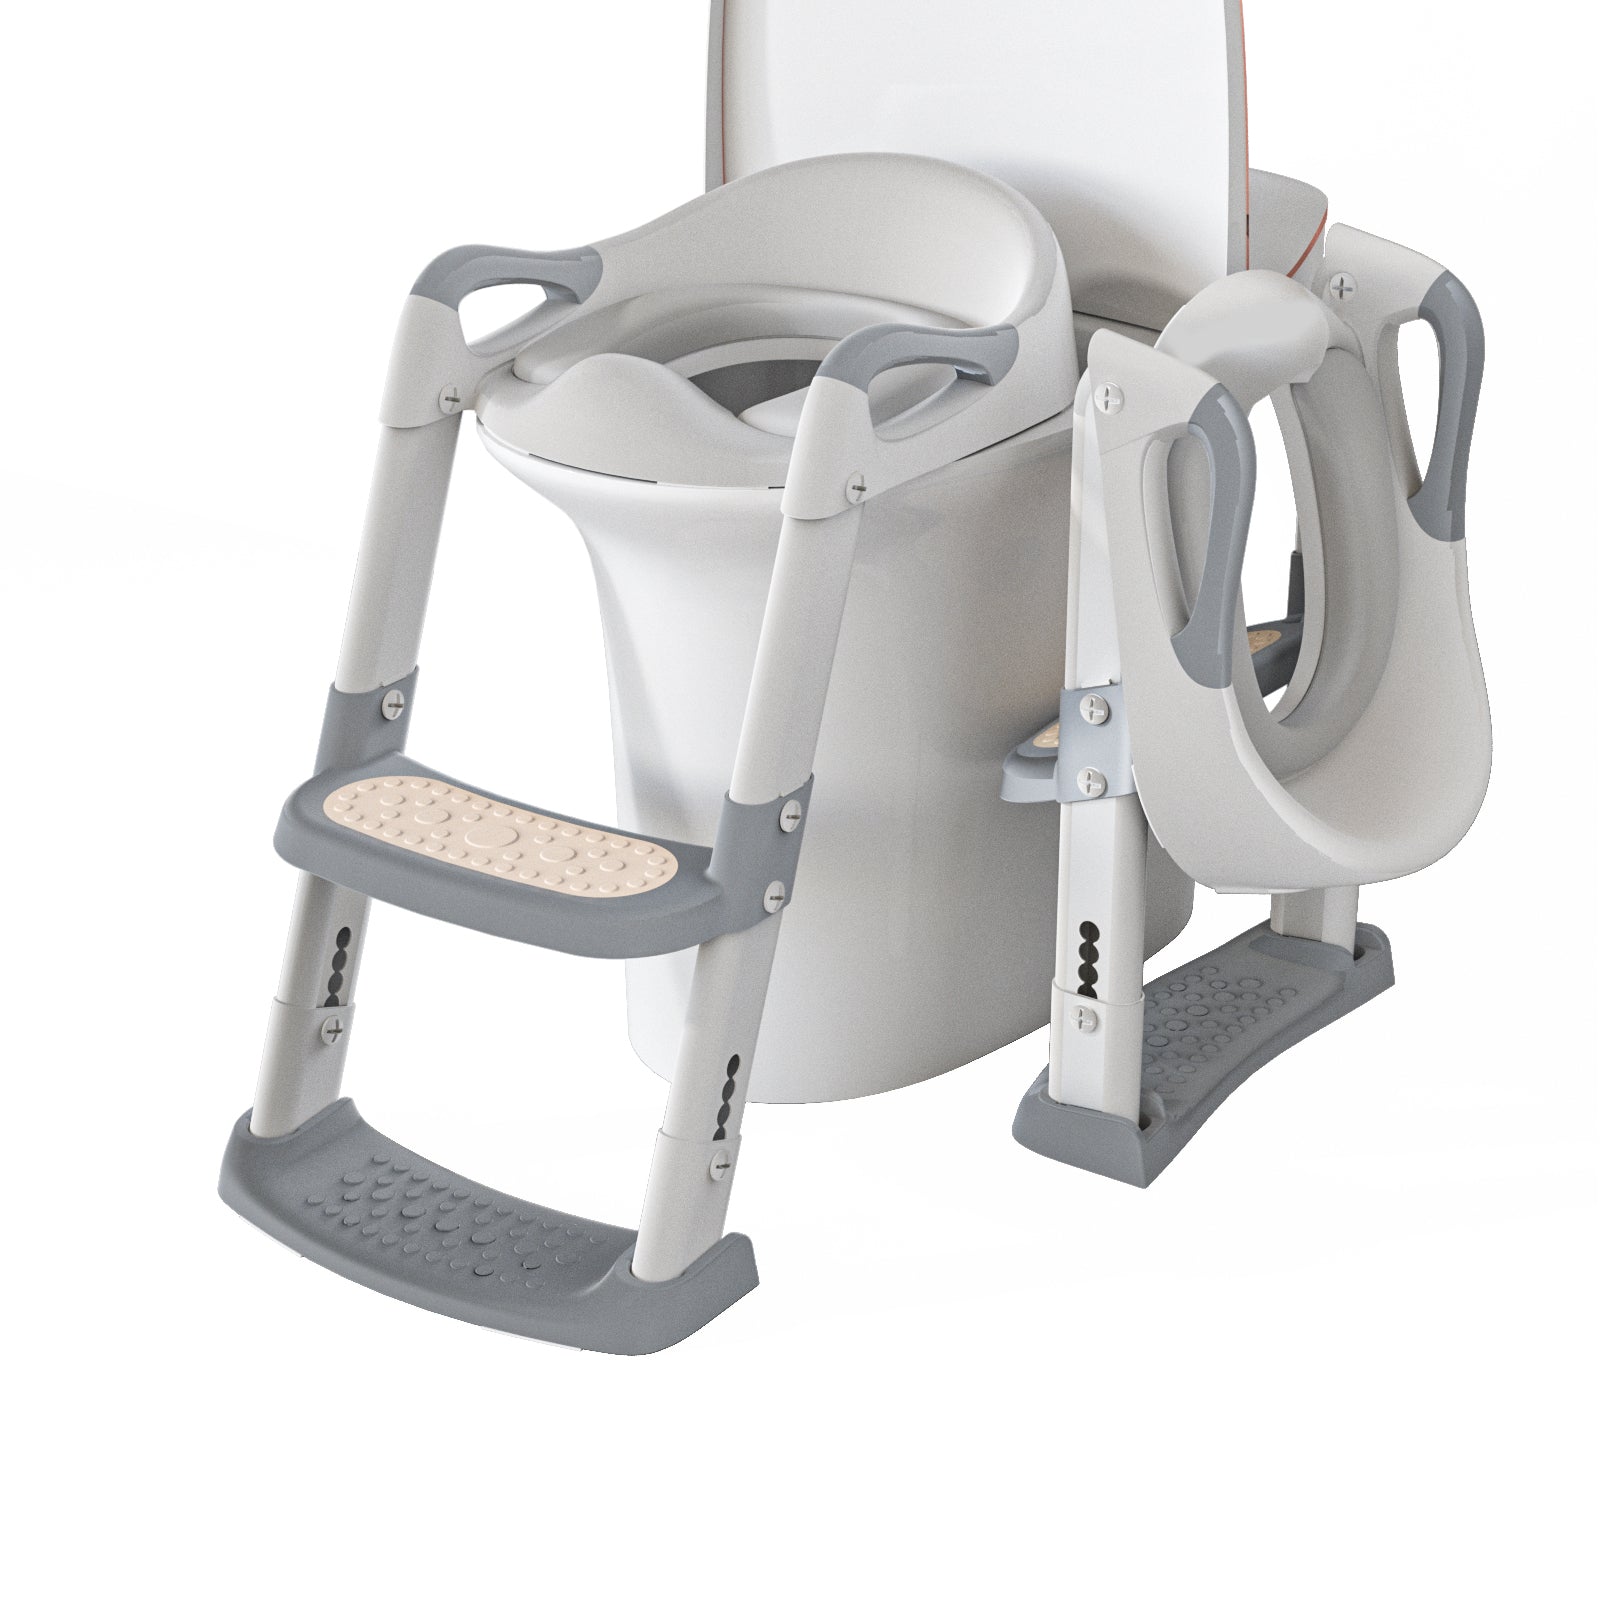 GLAF Toddler Potty Training Seat for Toilet with Ladder in gray white In Stock USA